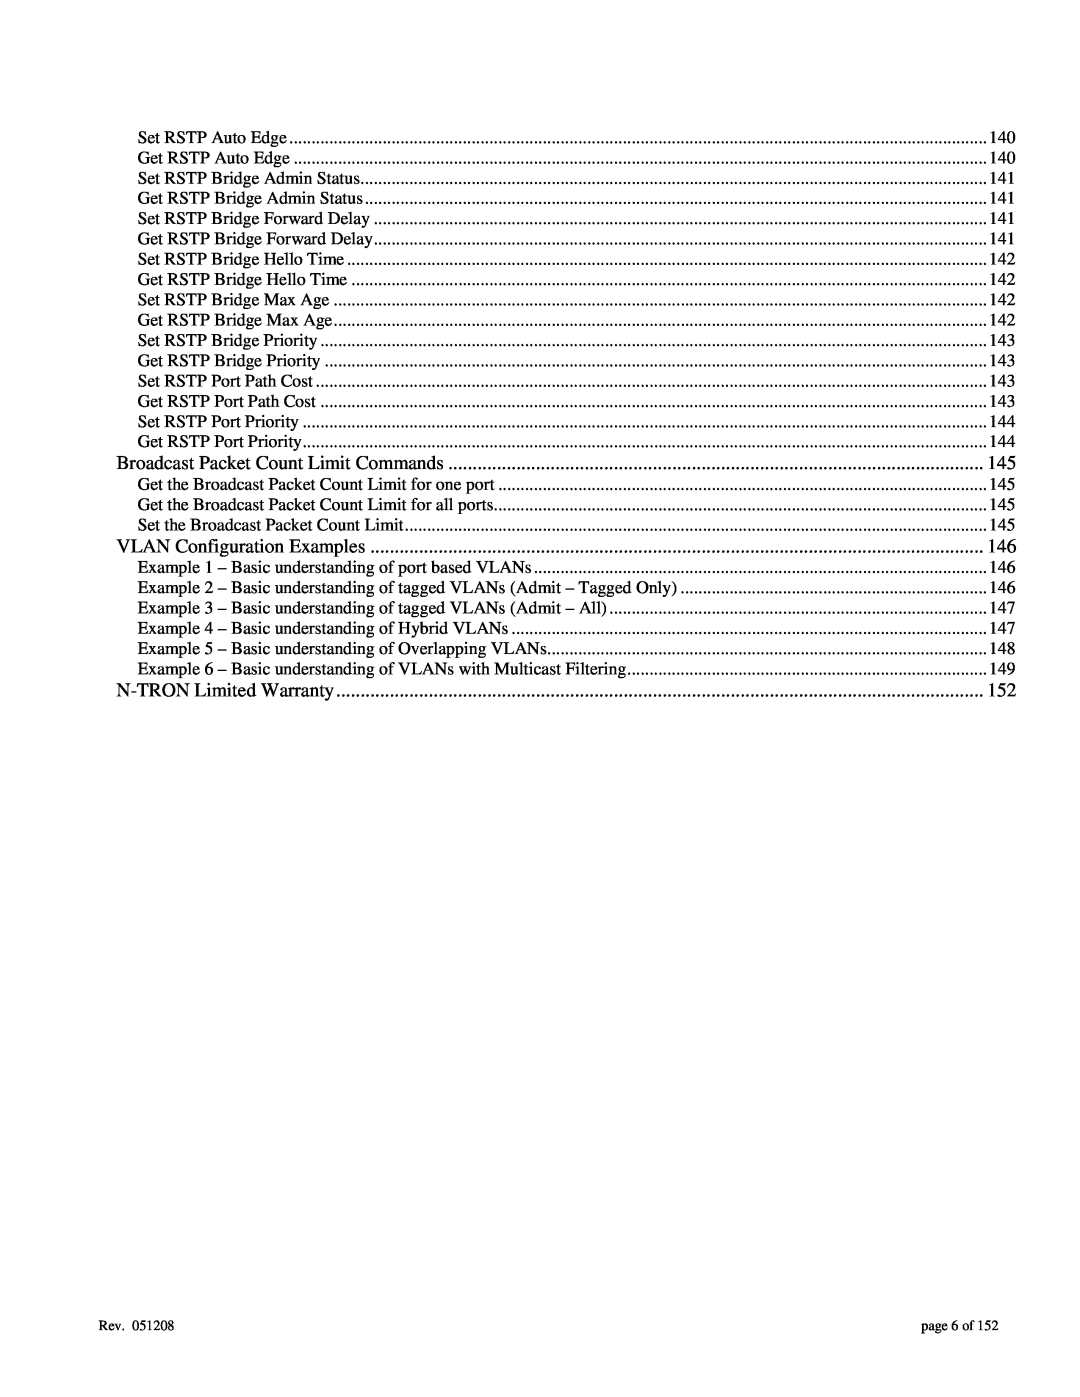 Gigabyte 7014 user manual page 6 of 